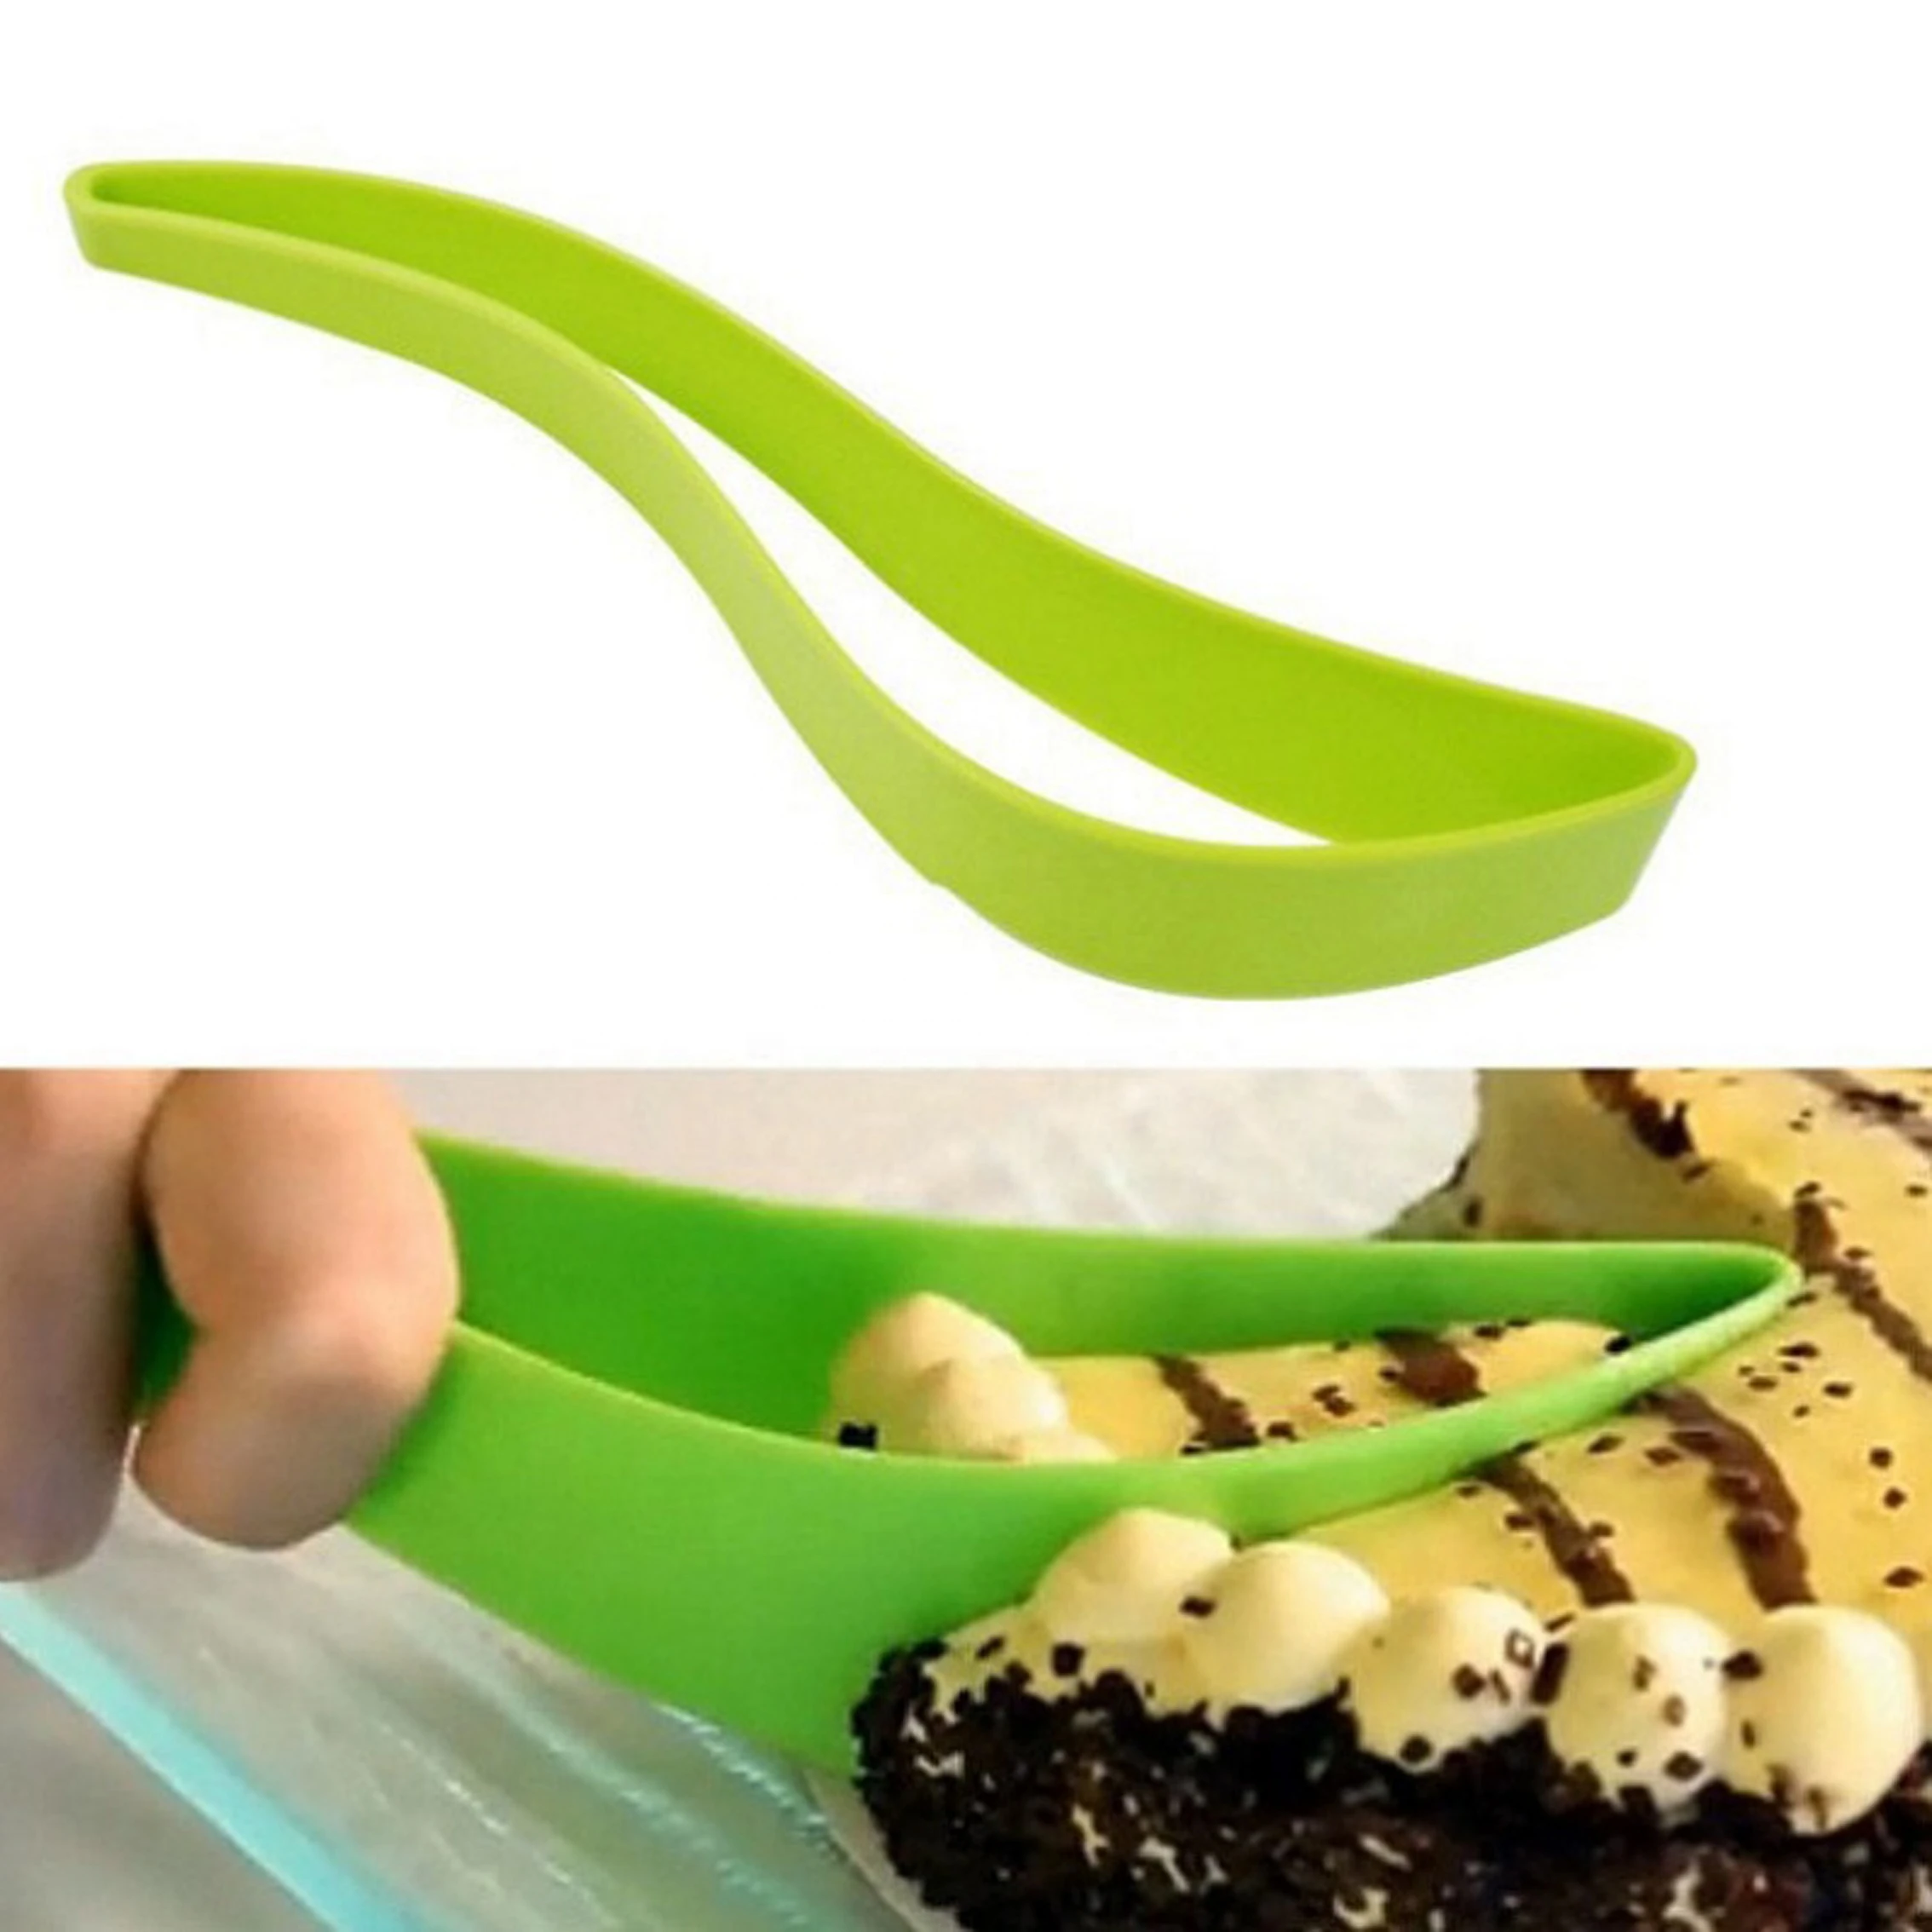 Hot Selling Cake Pie Slicer Silicone Small Cake Slice Kitchen Plastic Gadget Pancake Cutter Cooking Baking Tools Pie Cutters